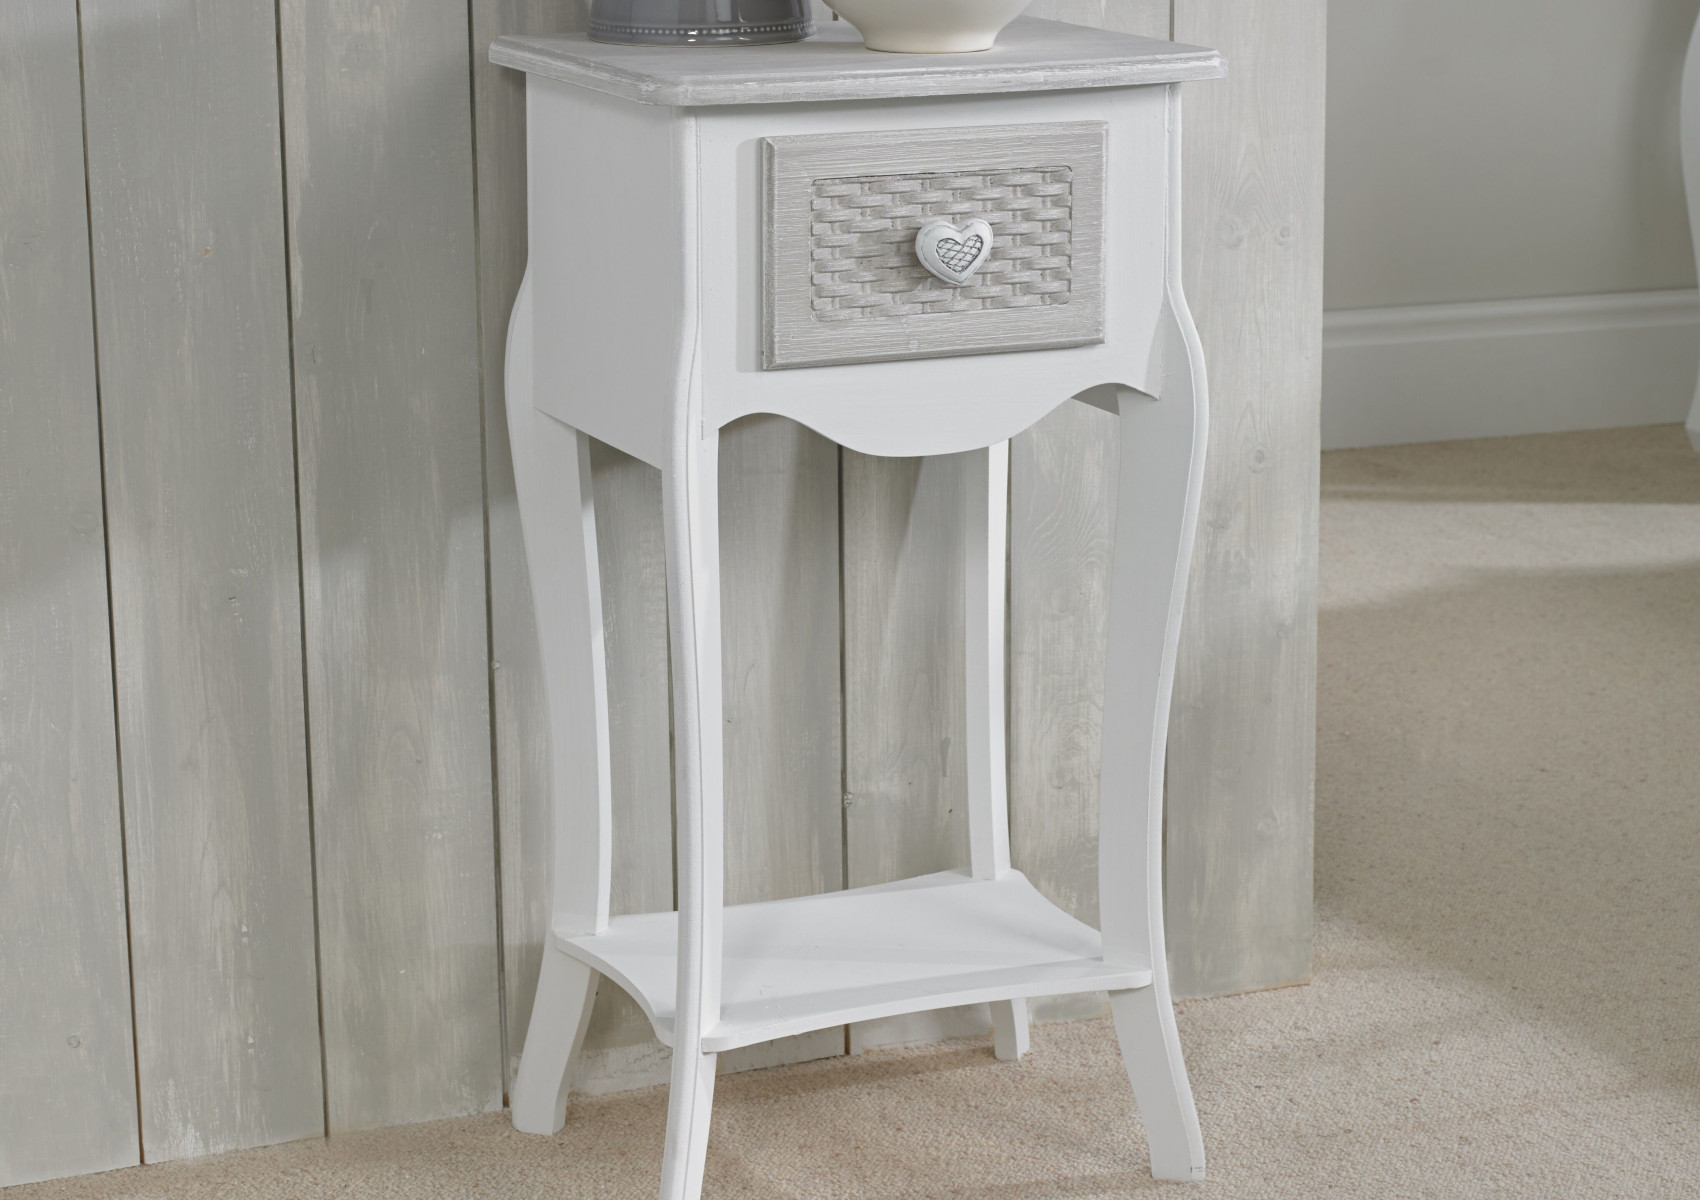 View Brittany WhiteGrey 1 Drawer Bedside Cabinet Time4Sleep information